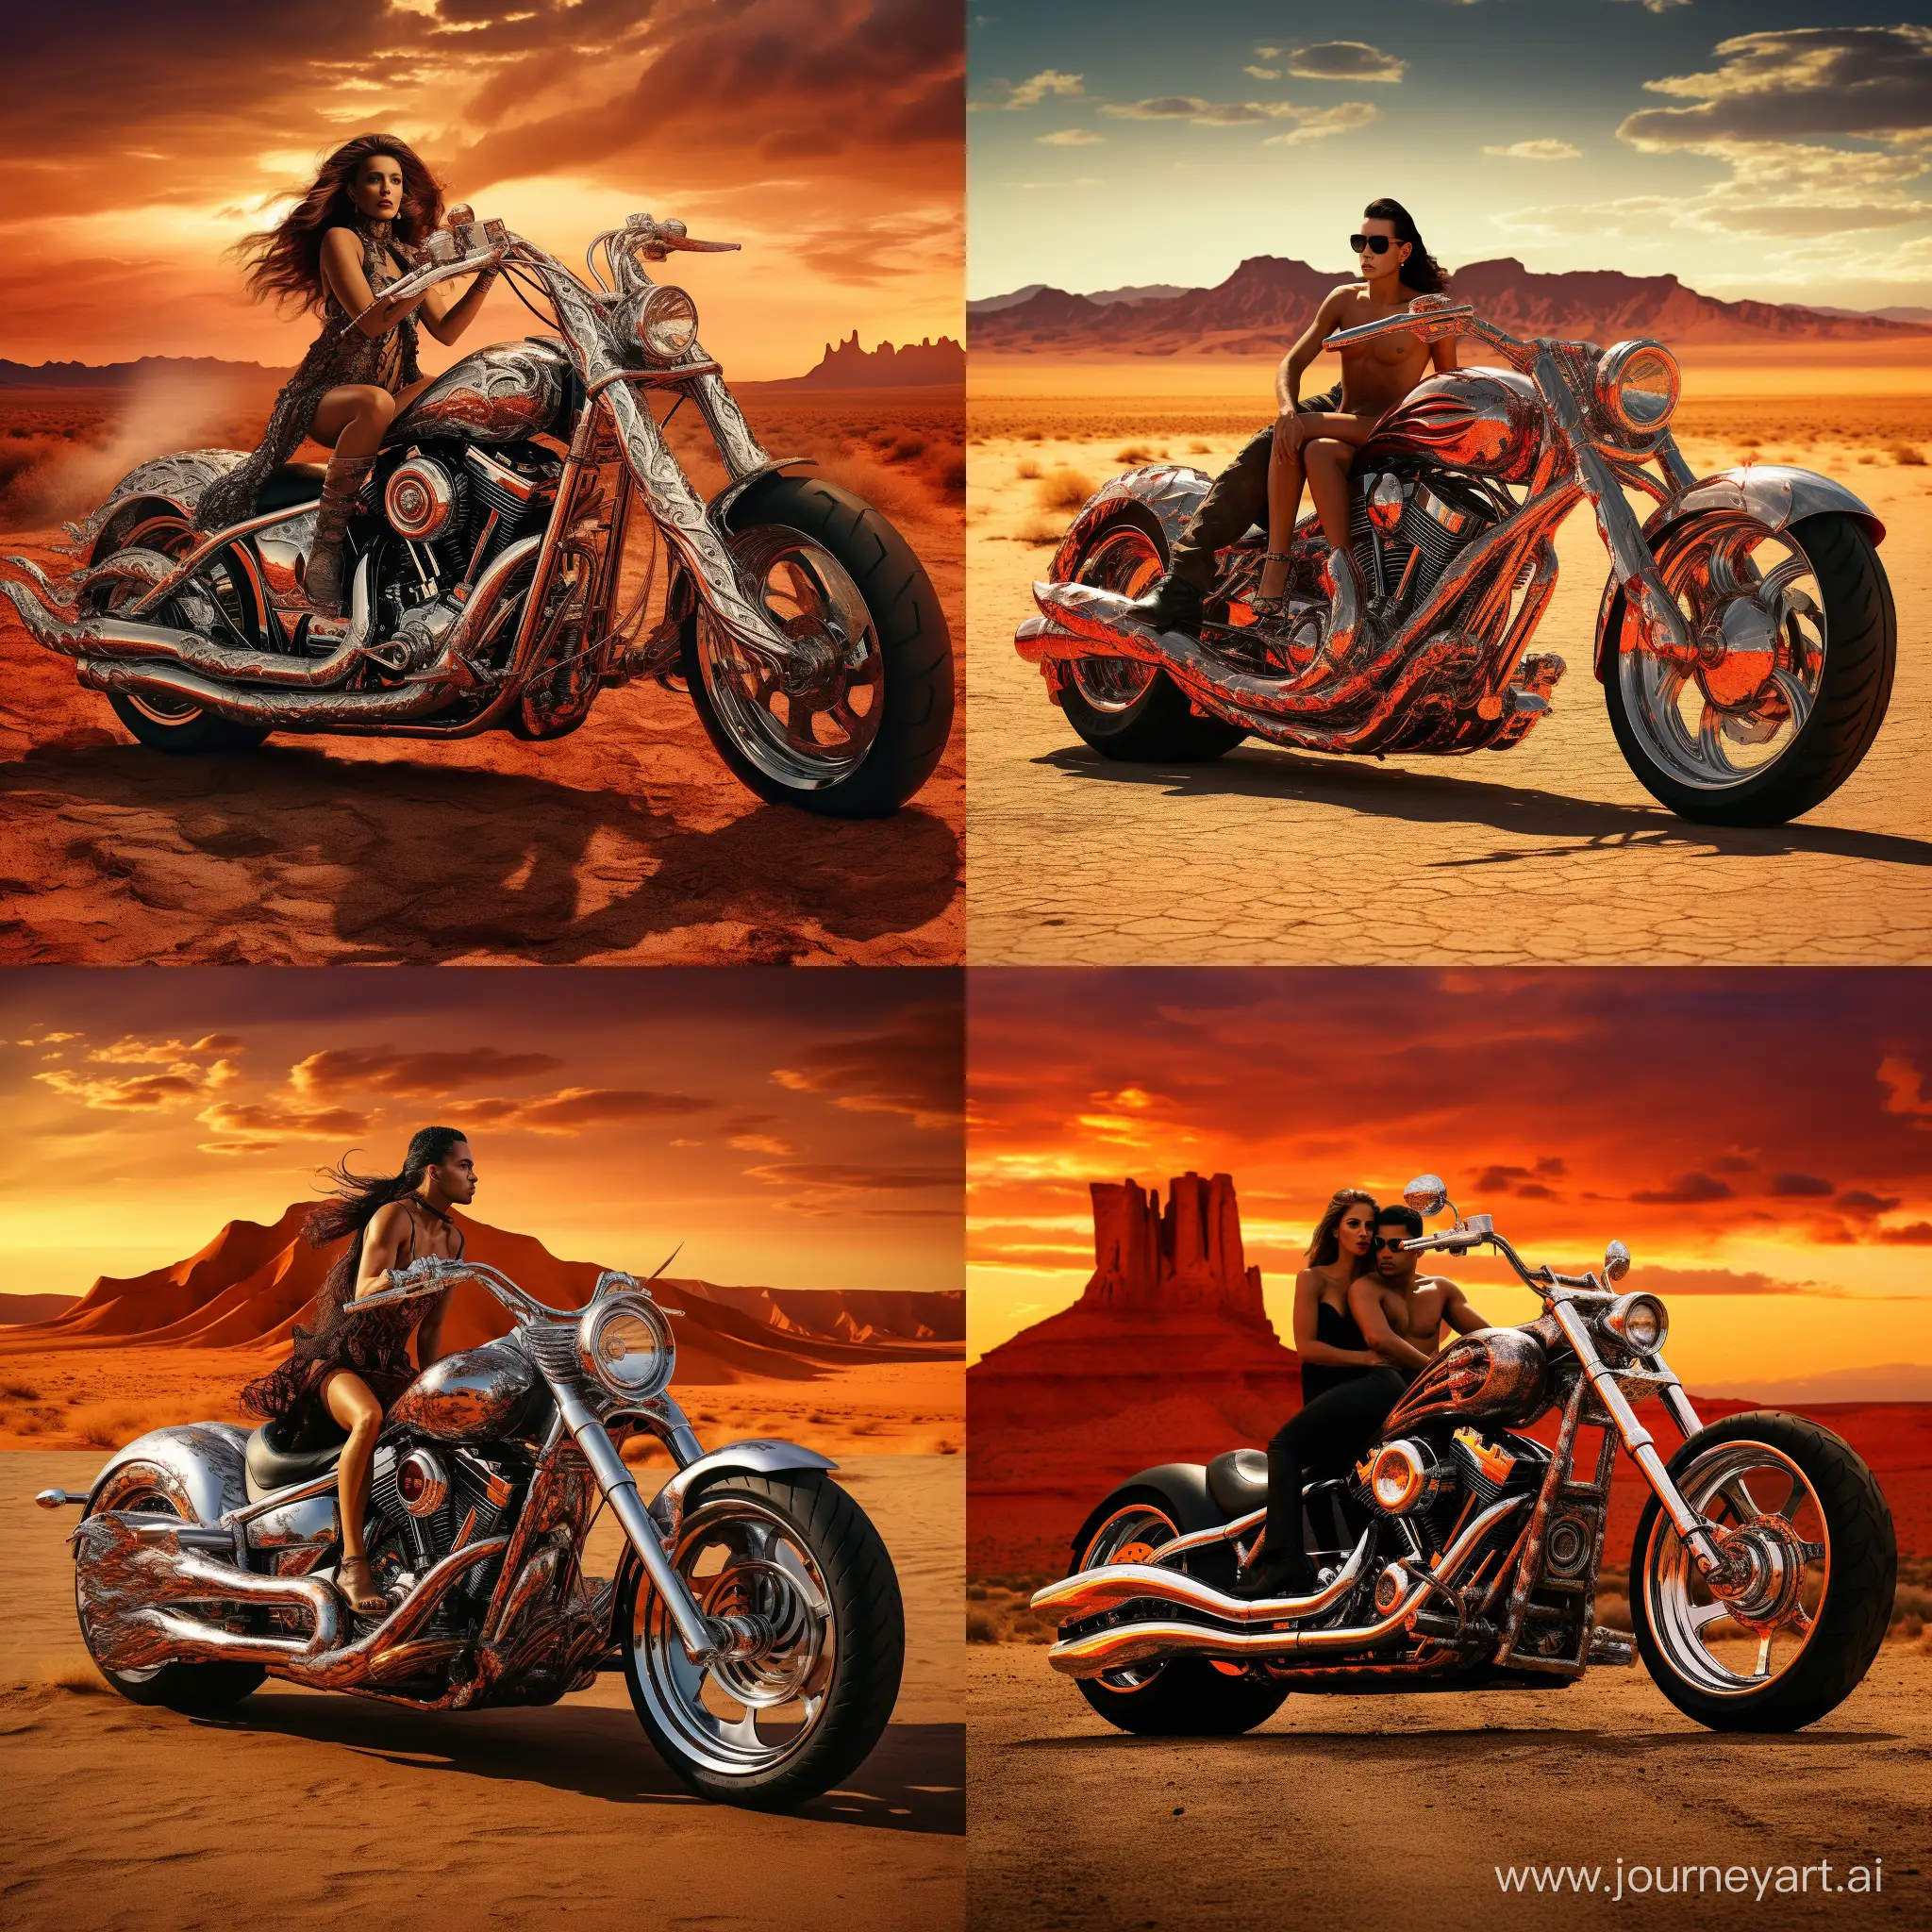 Fiery-Demon-Riding-Chrome-LowRider-Motorcycle-in-Stormy-Desert-Sky